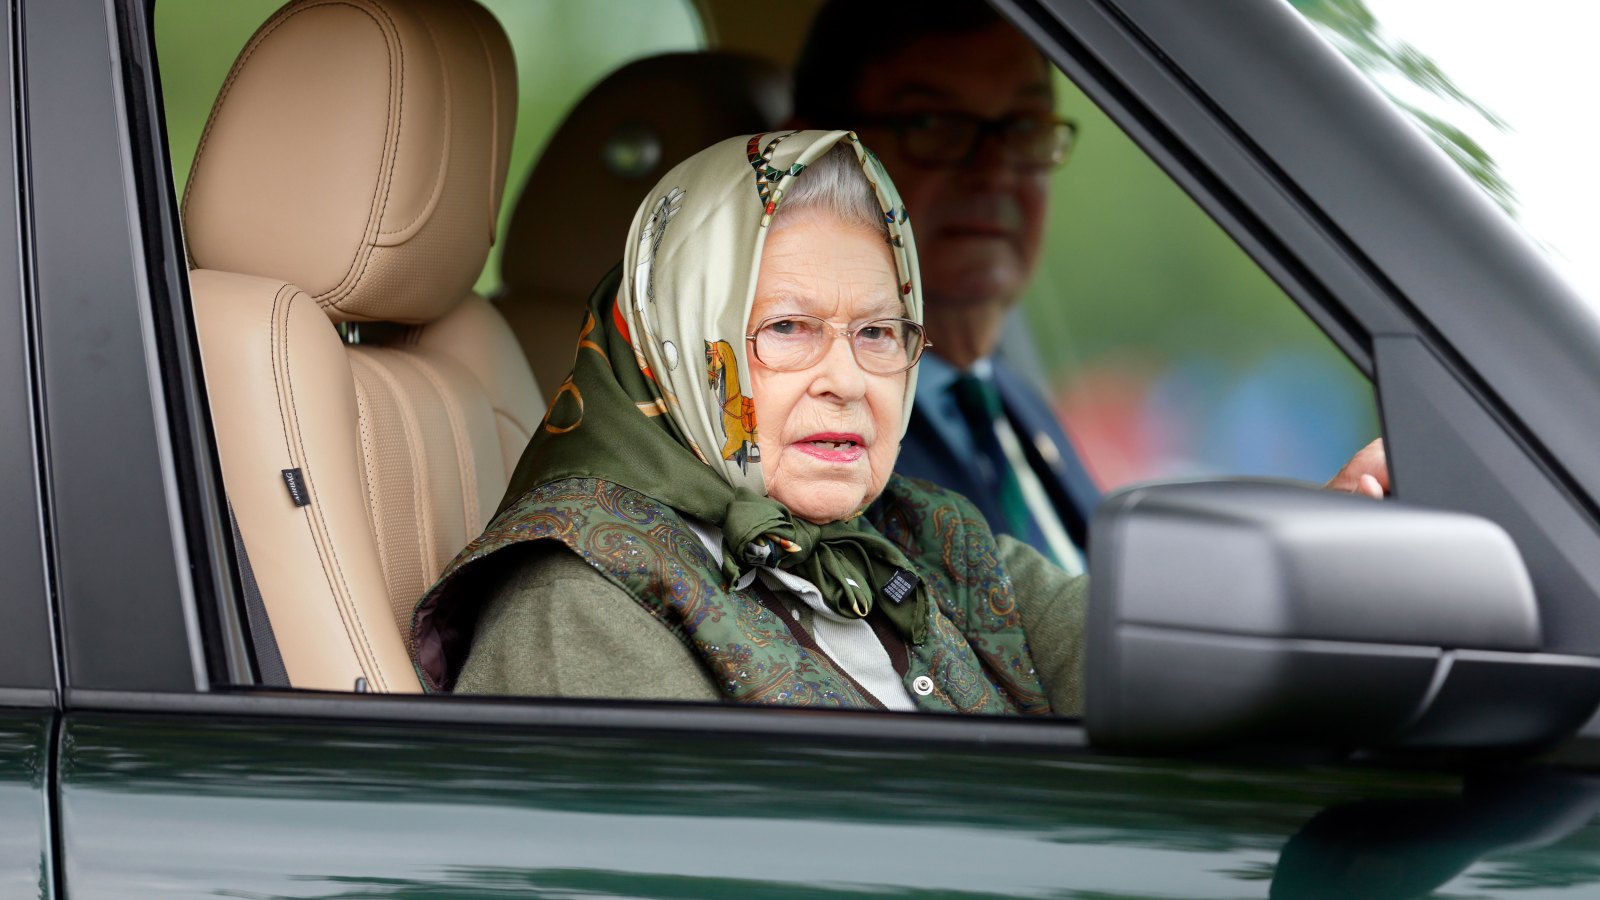 Queen-Elizabeth-II-Drives-Without-a-Seatbelt-1-Day-After- Prince-Philip-Car-Accident